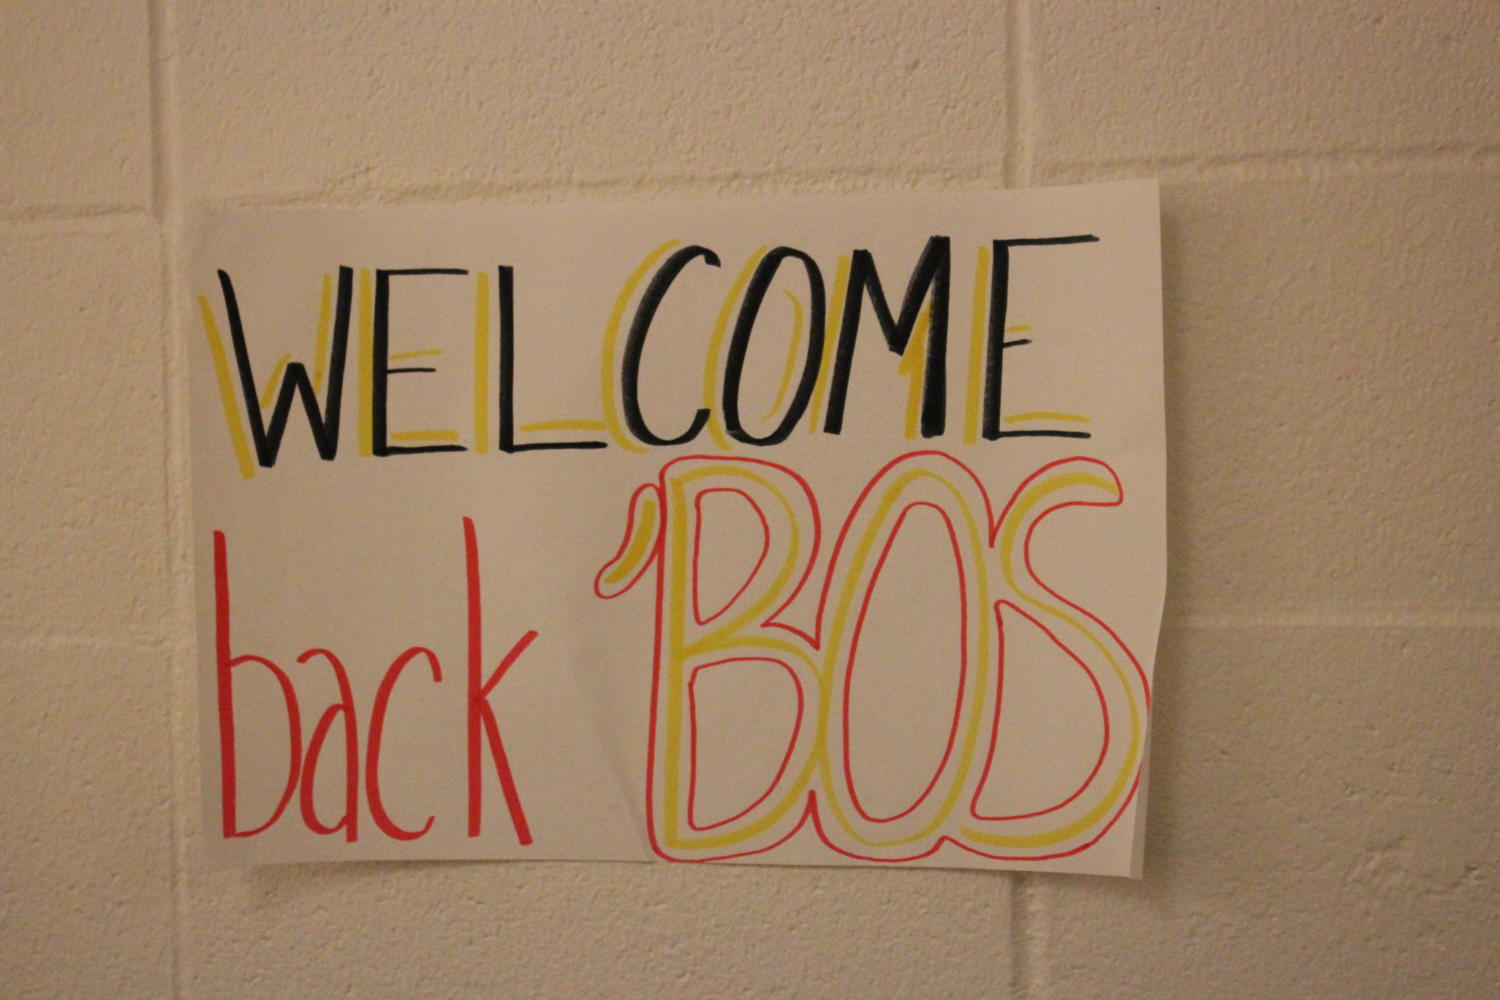  Welcome back Bos sign in hallway.